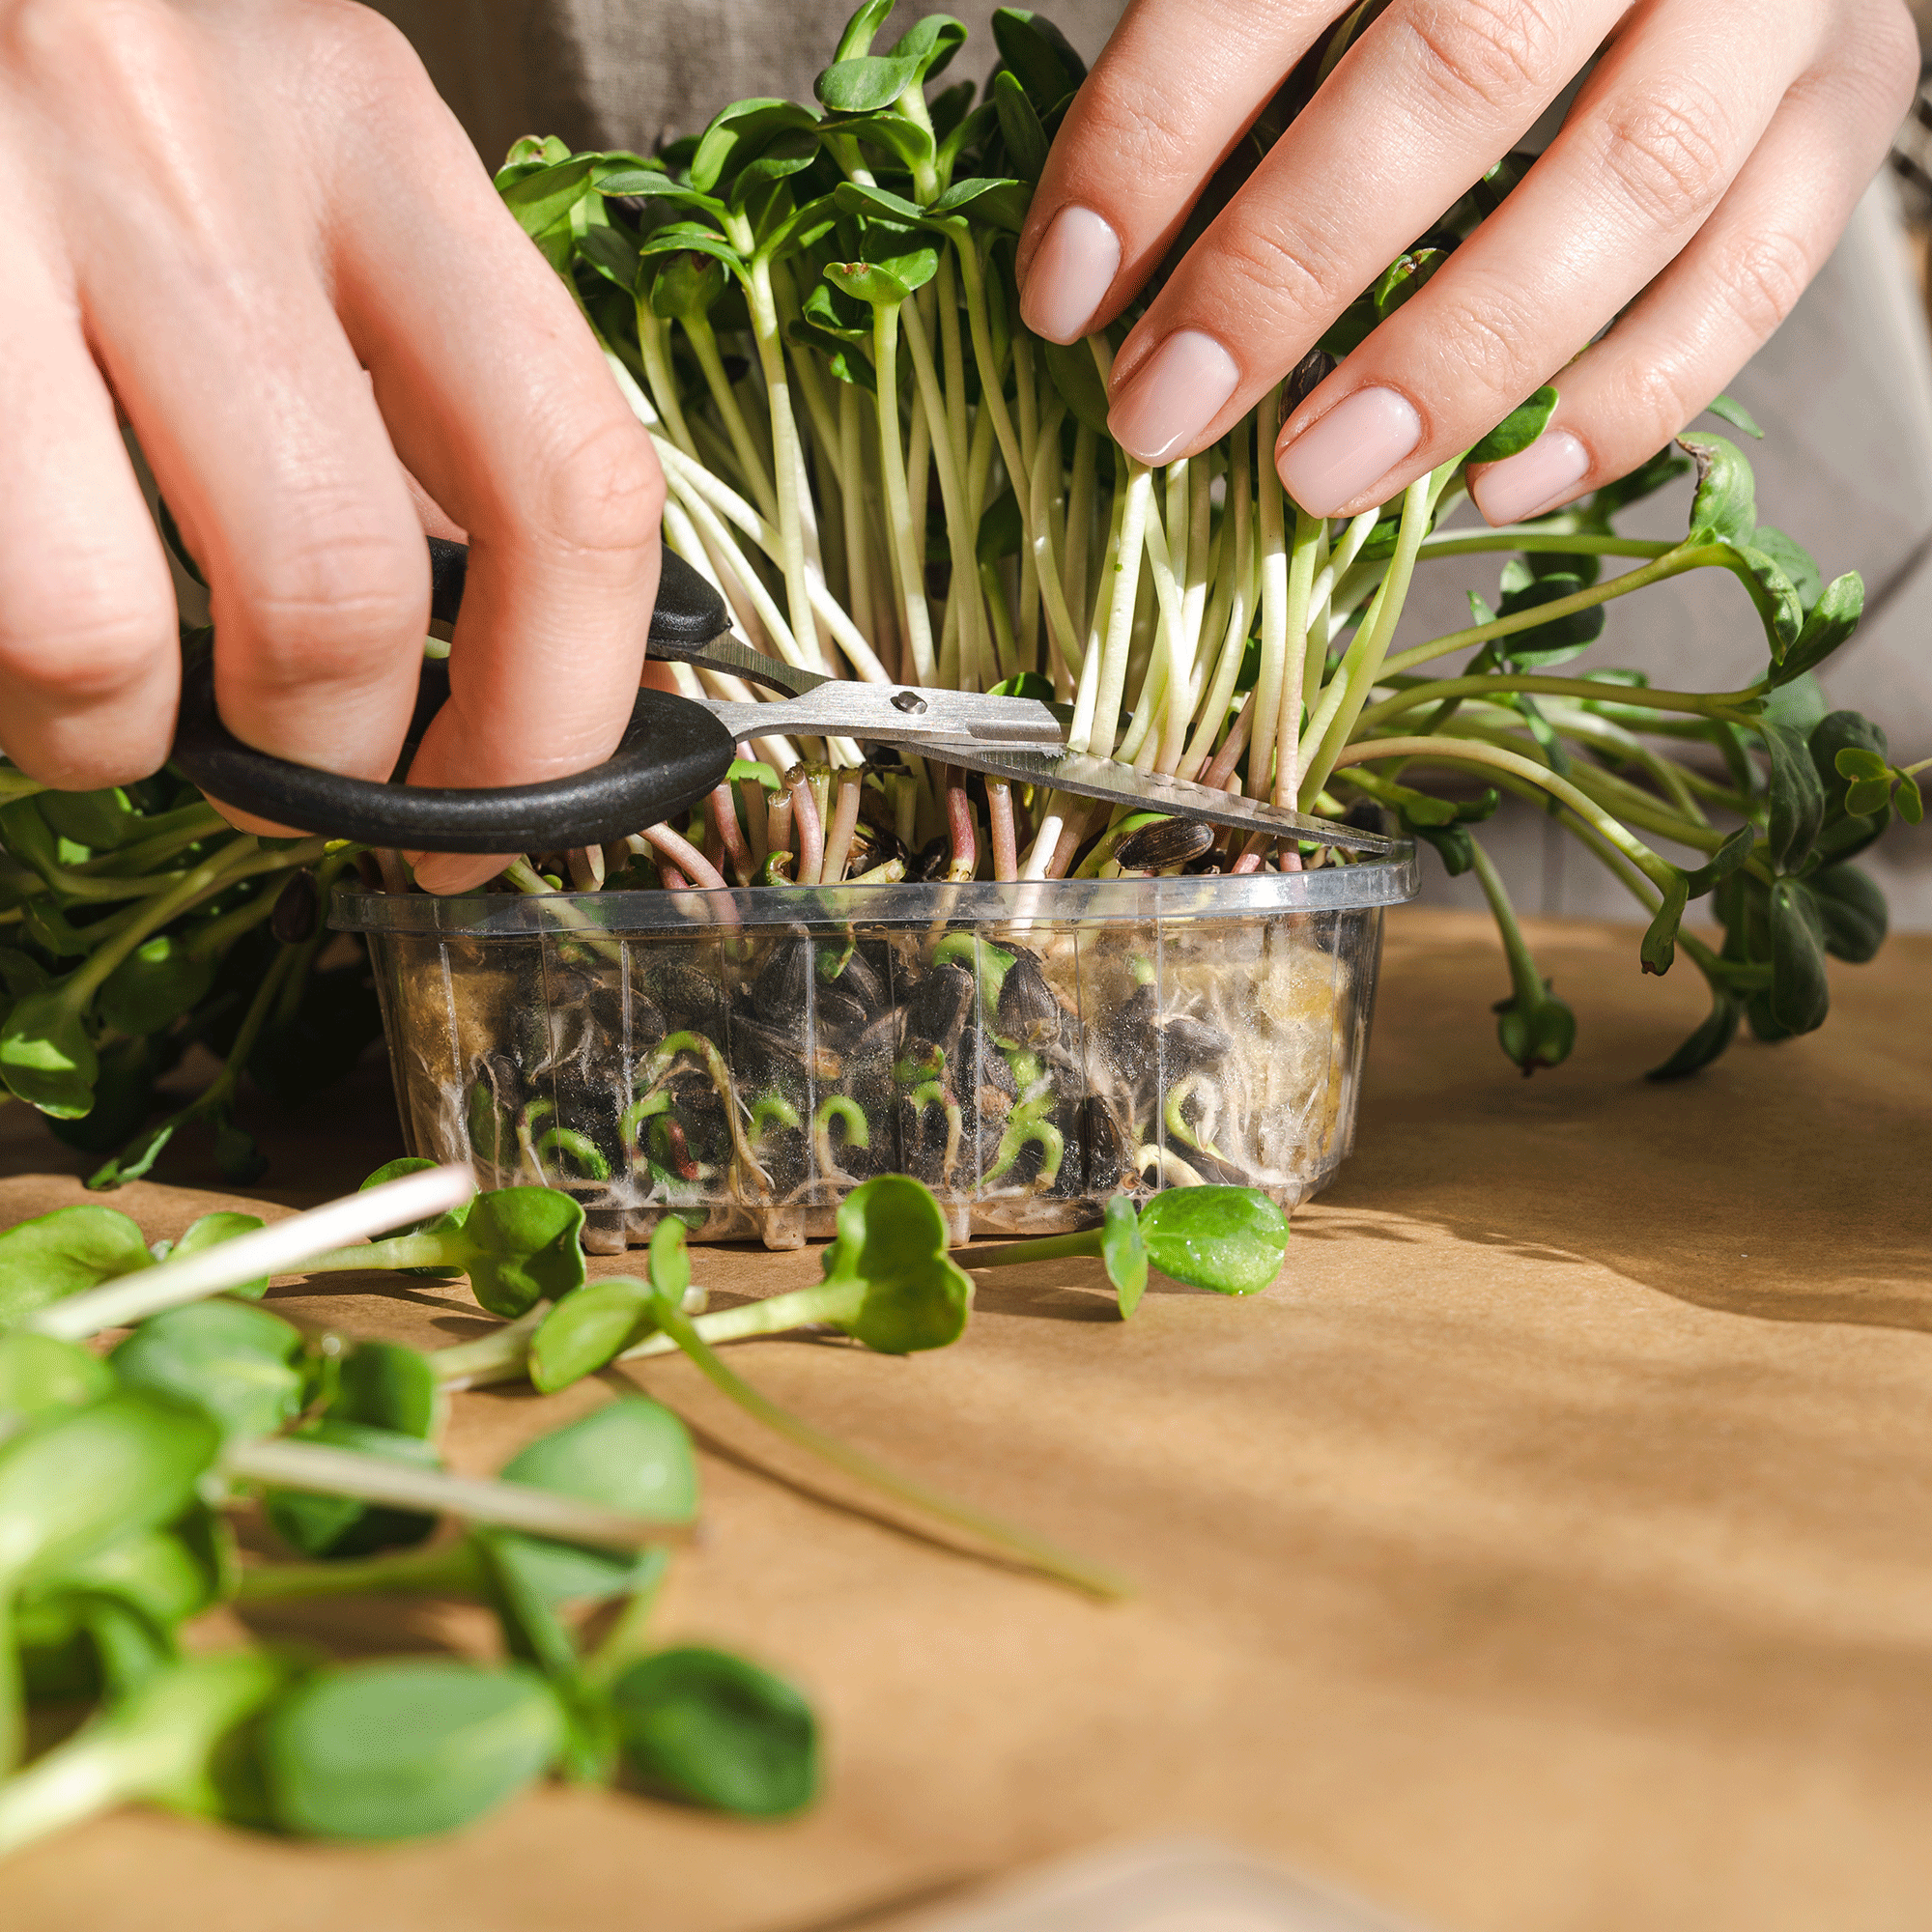 Hand snipping off microgreens